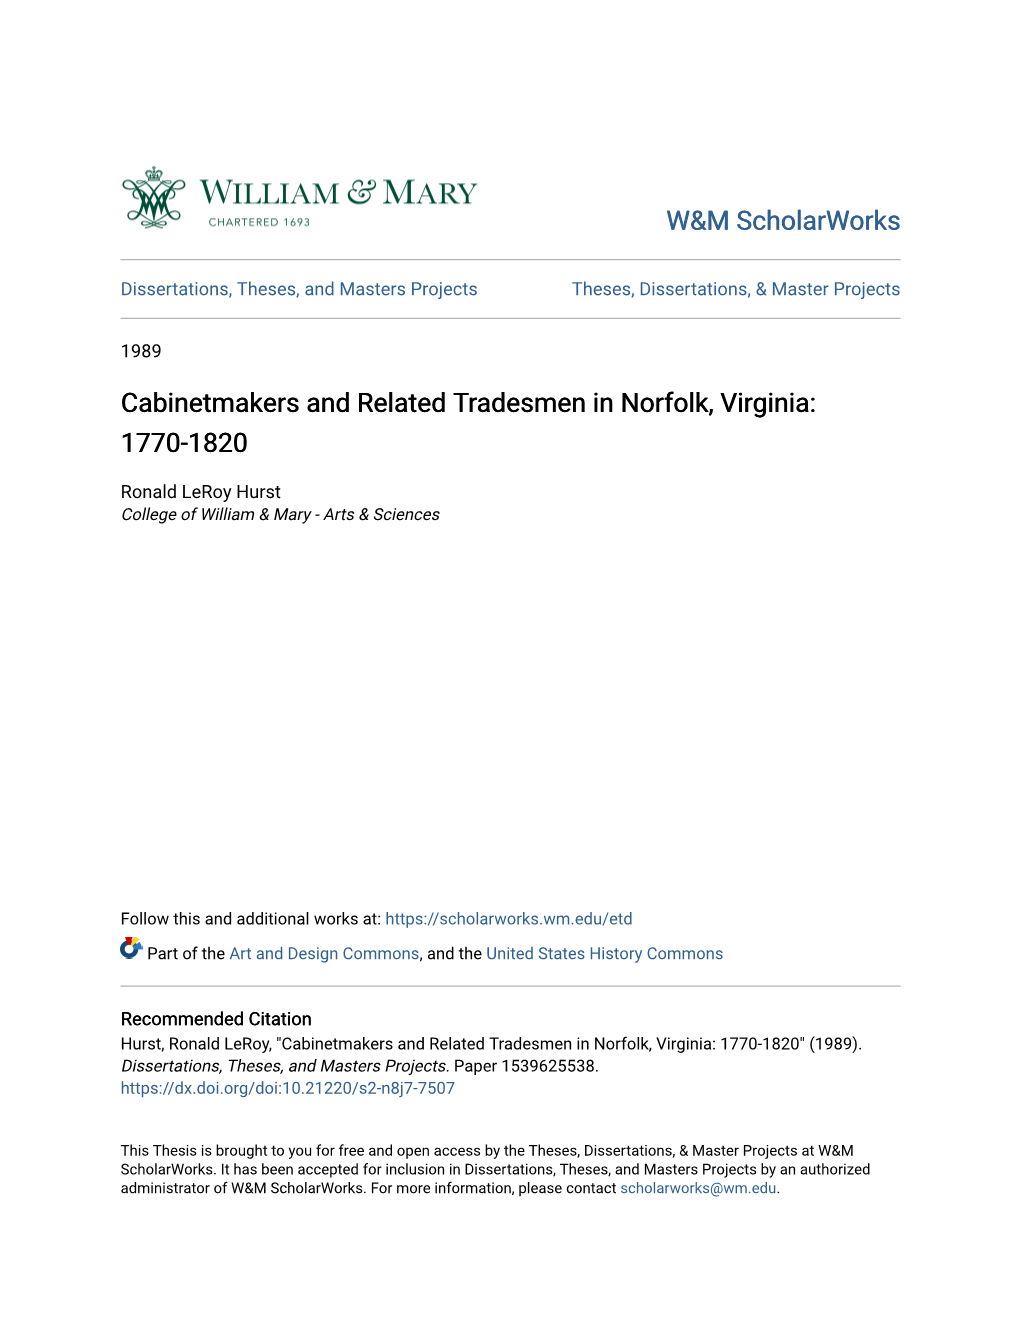 Cabinetmakers and Related Tradesmen in Norfolk, Virginia: 1770-1820